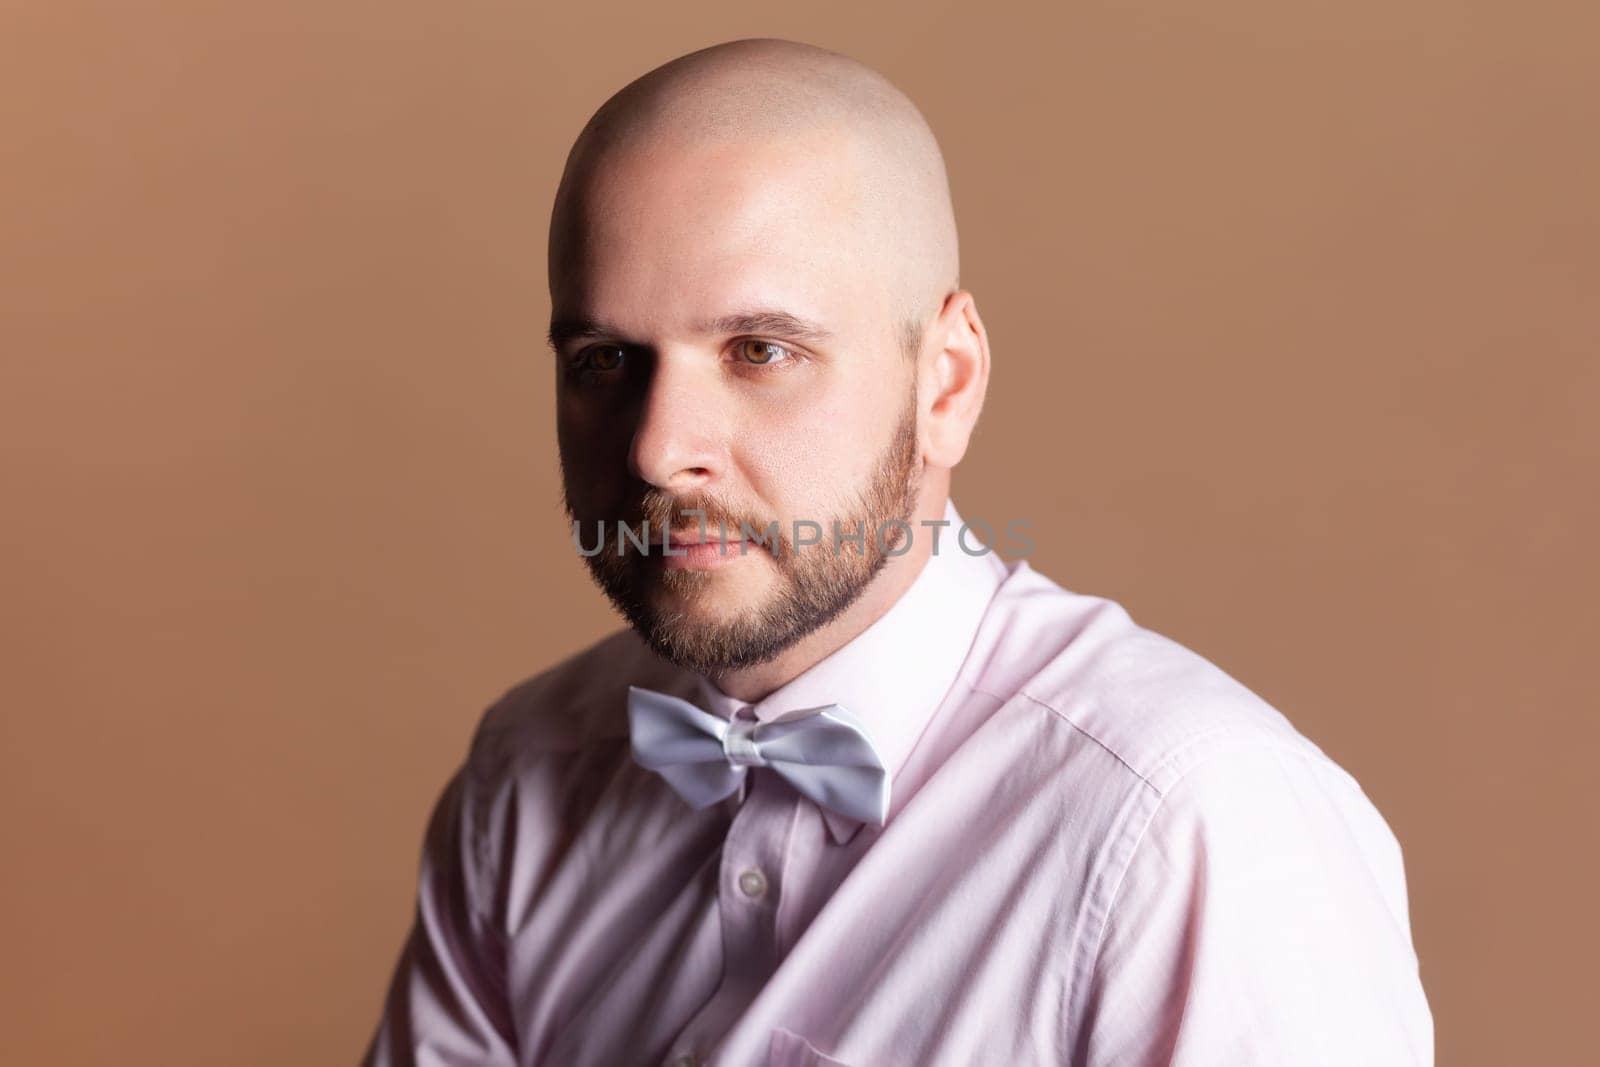 Portrait of handsome attractive bald bearded man looking away with pensive thoughtful facial expression, wearing light pink shirt and bow tie. Indoor studio shot isolated on brown background.